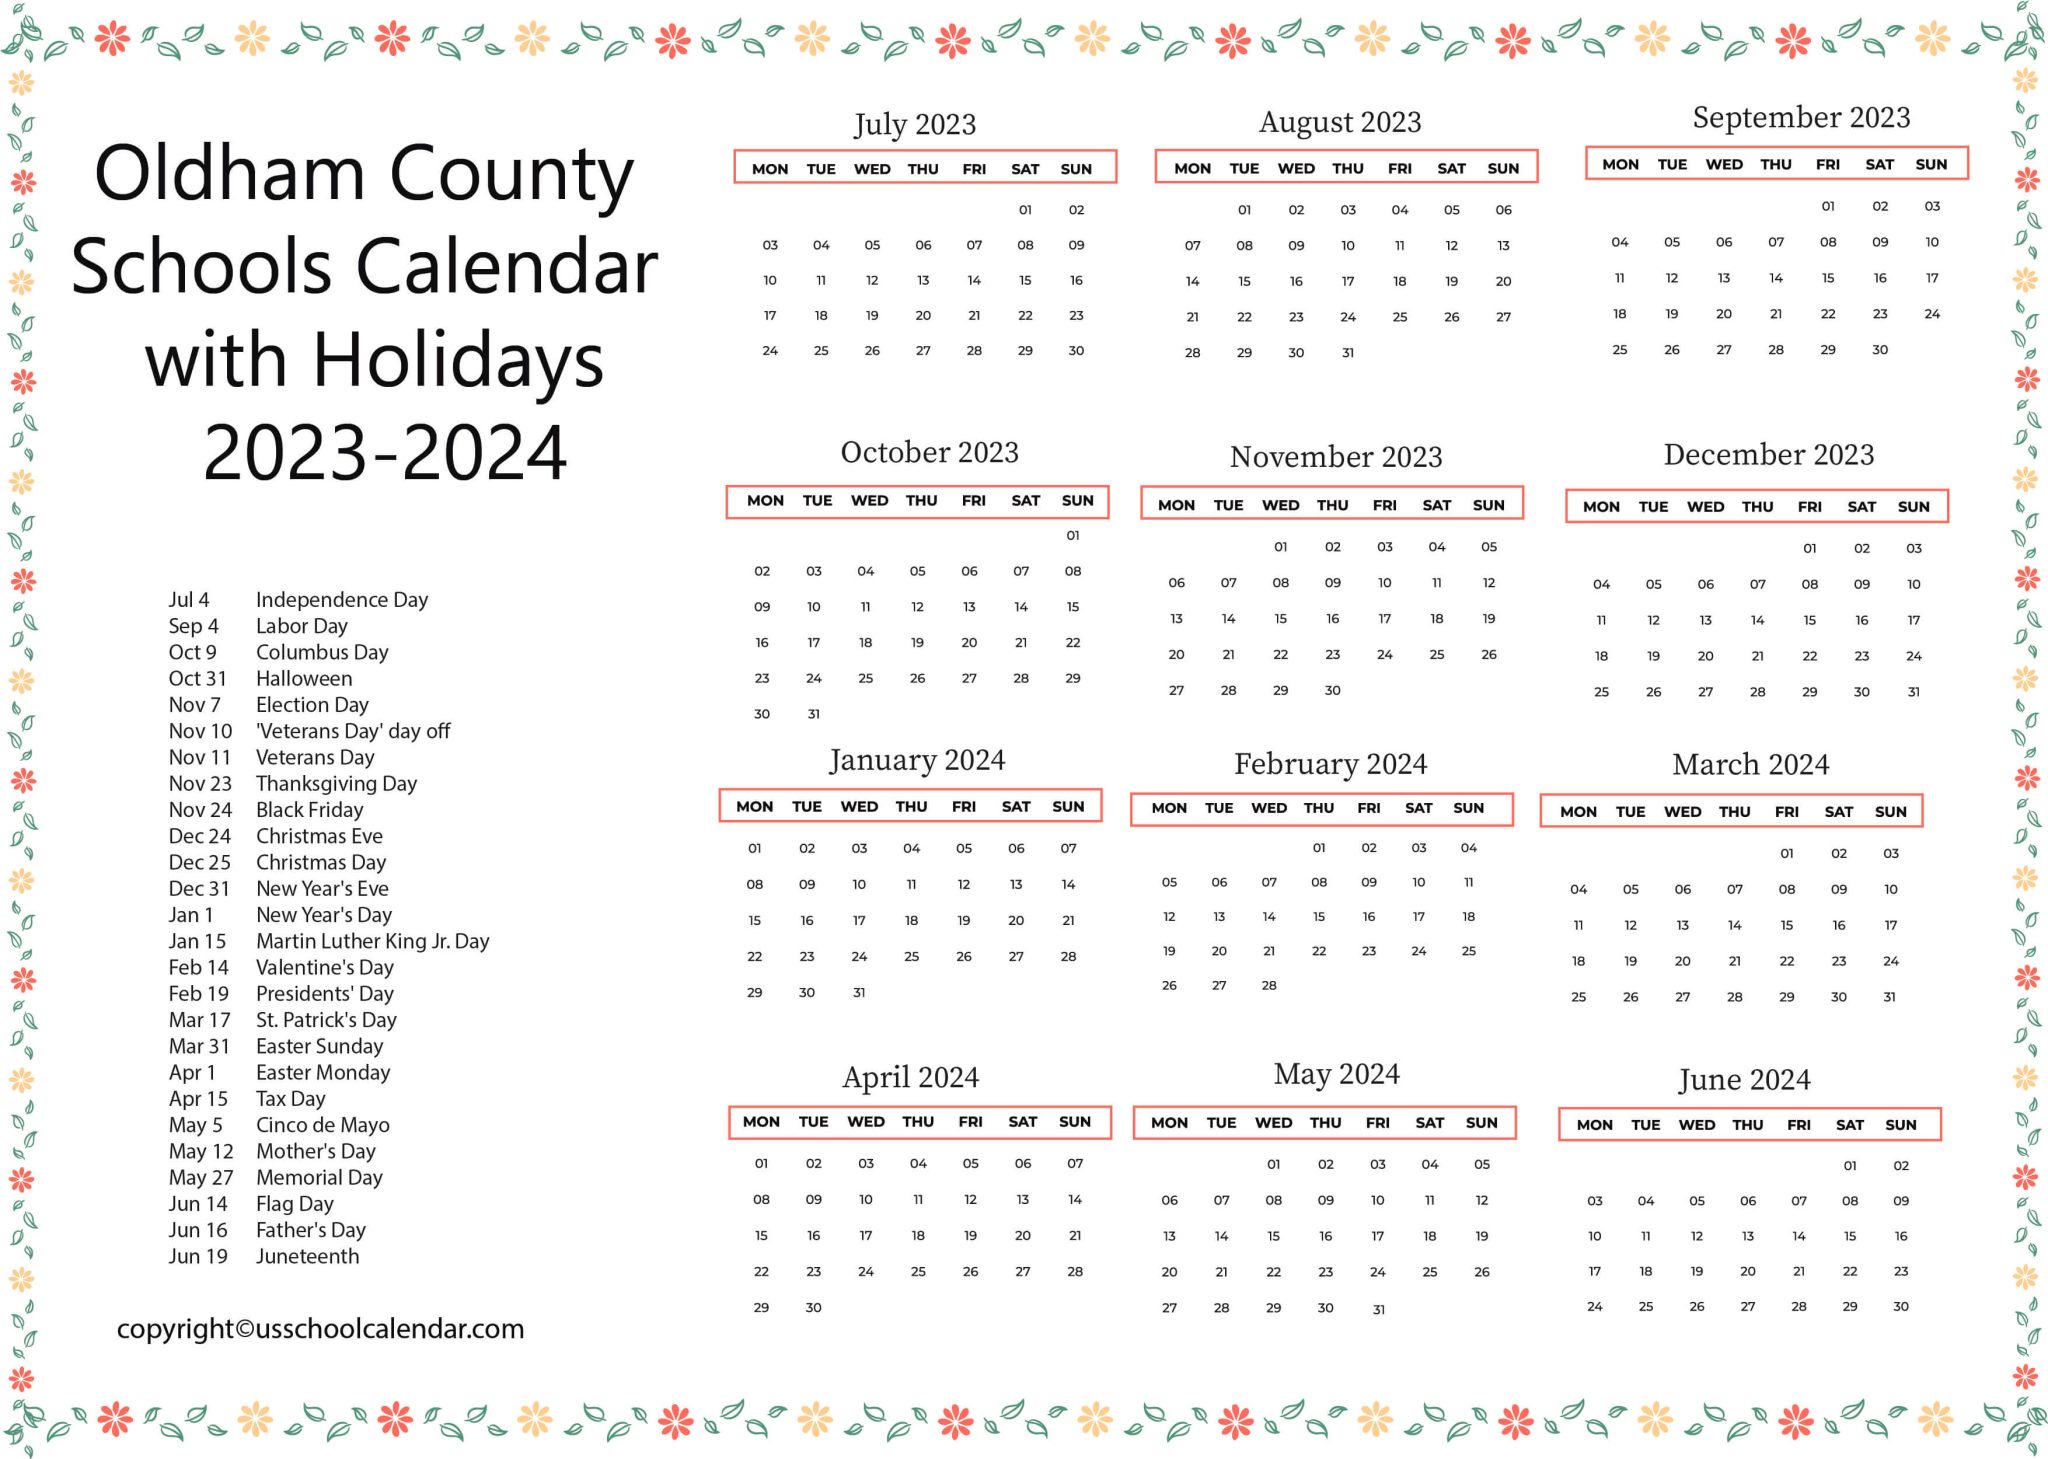 Oldham County Schools Calendar with Holidays 2023 2024